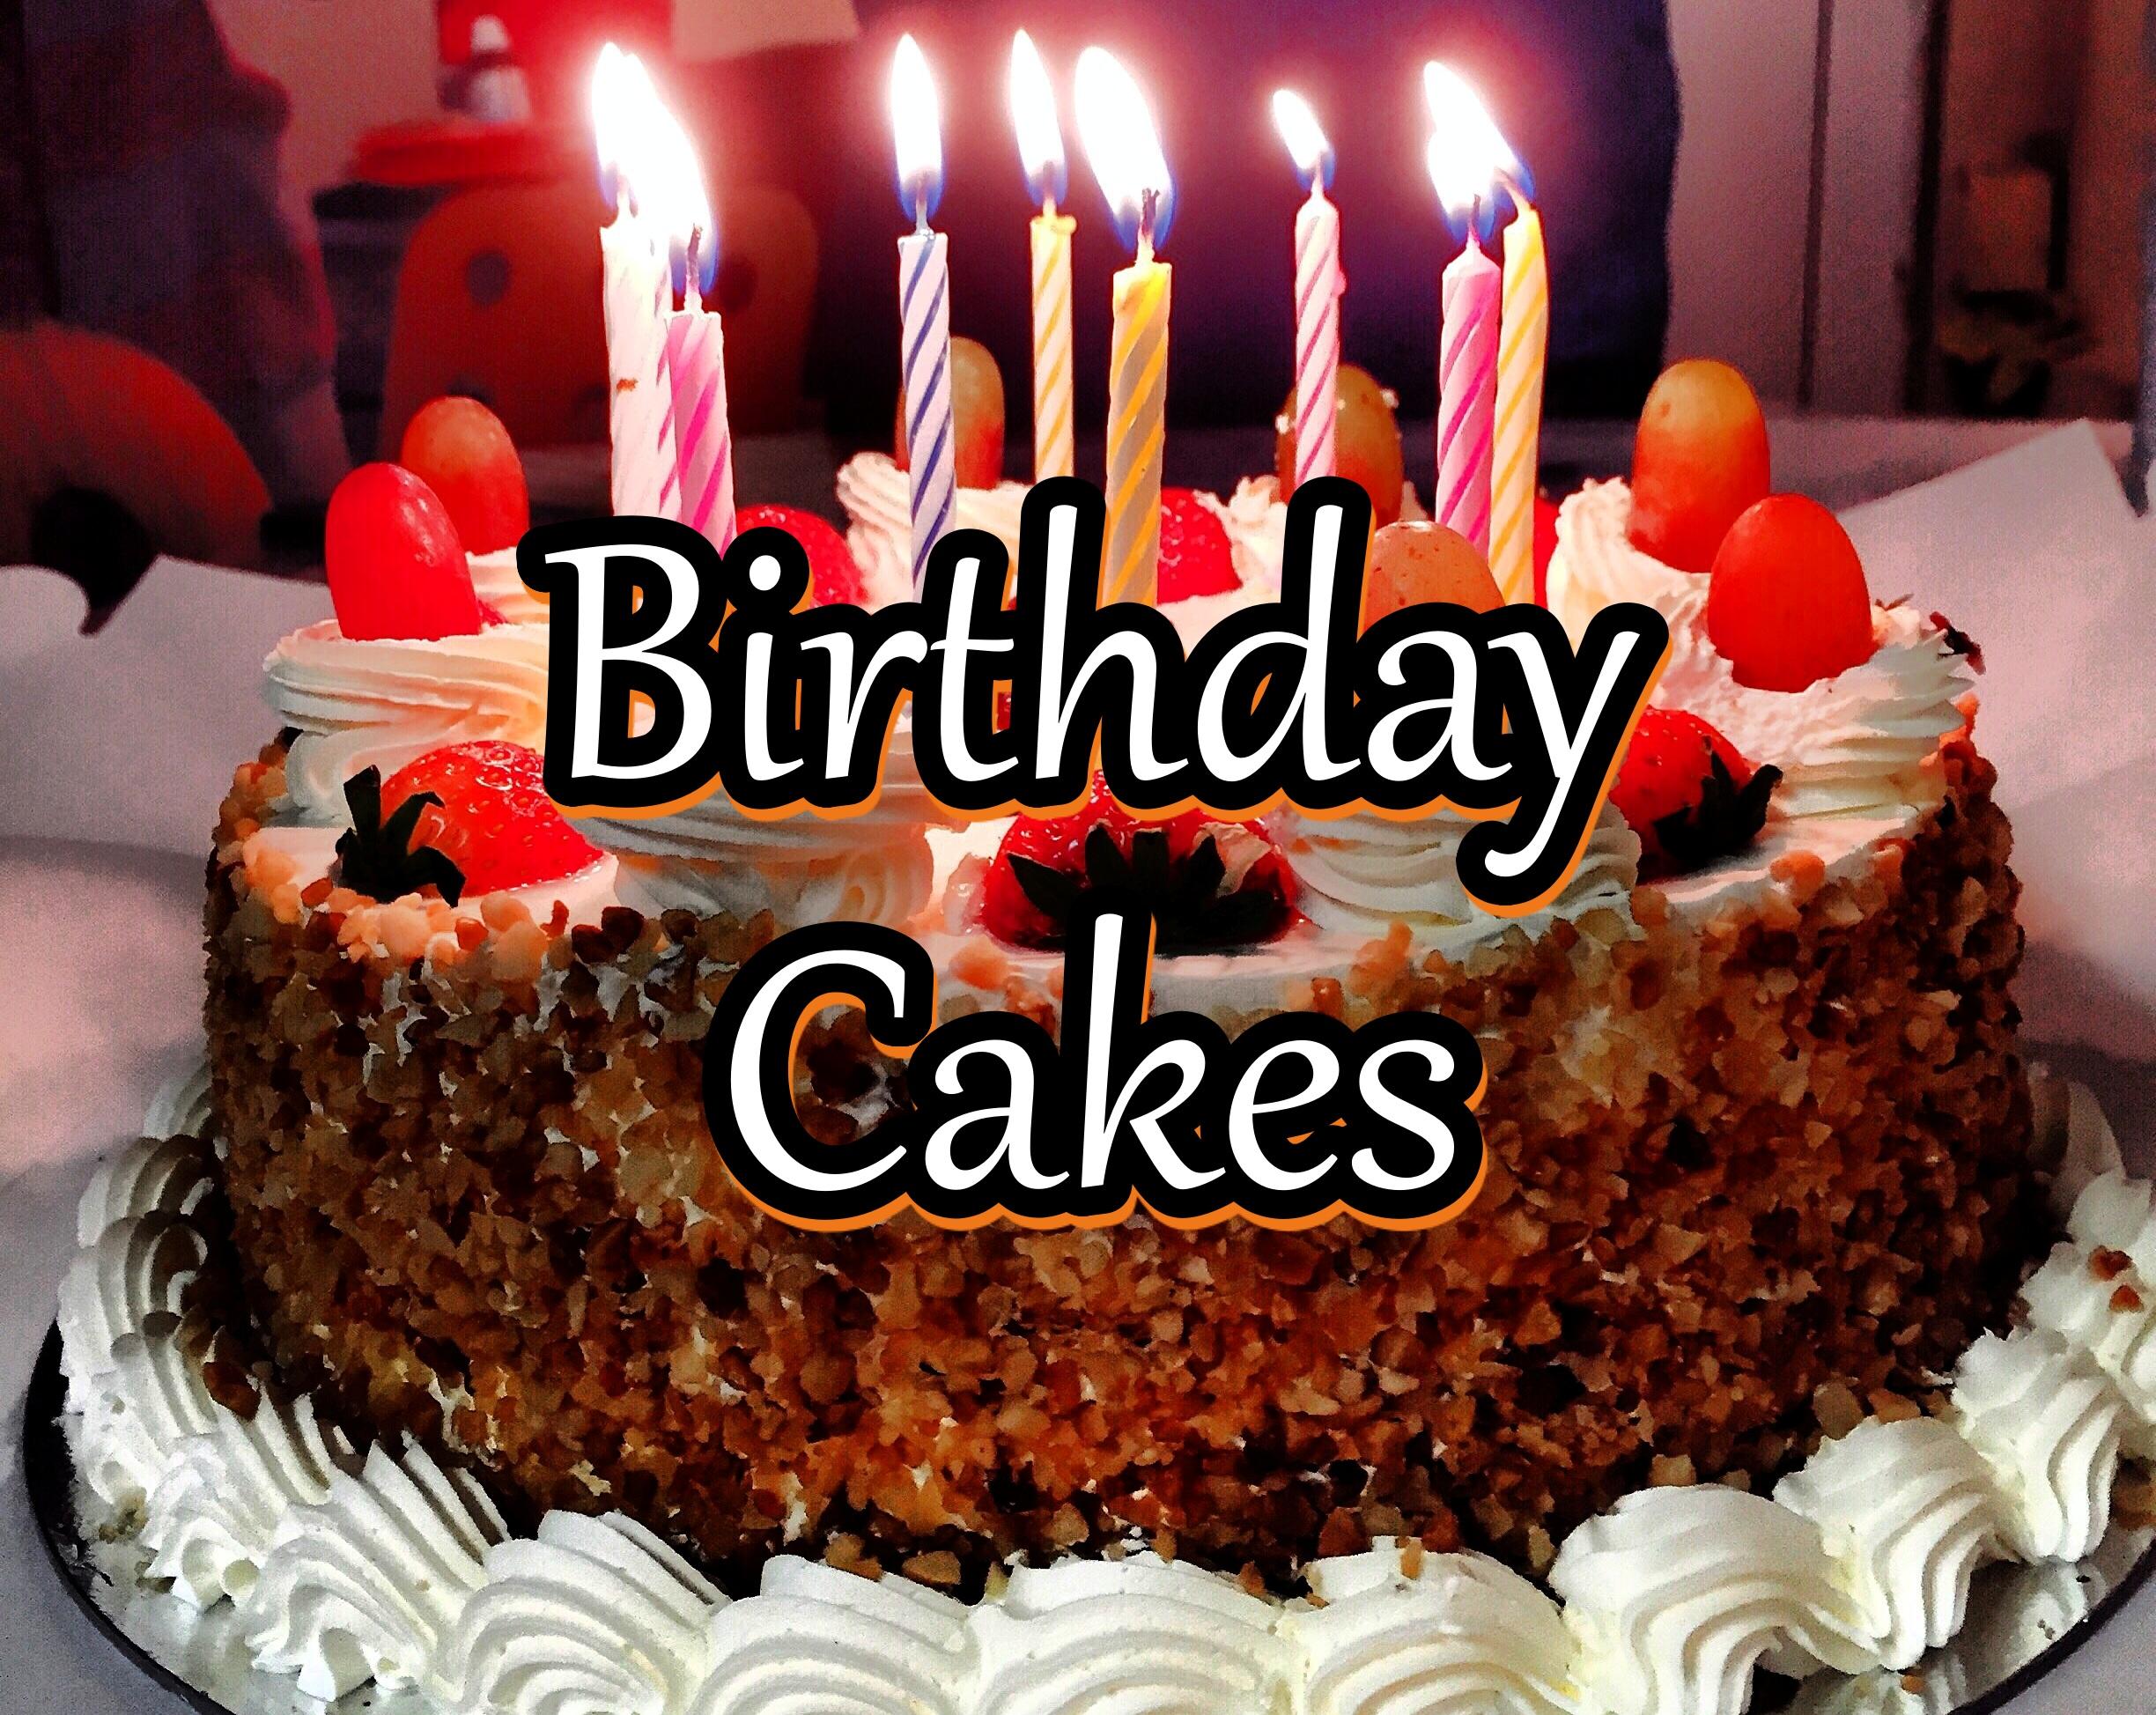 What Makes Eggless Cake Delivery Are Ideal